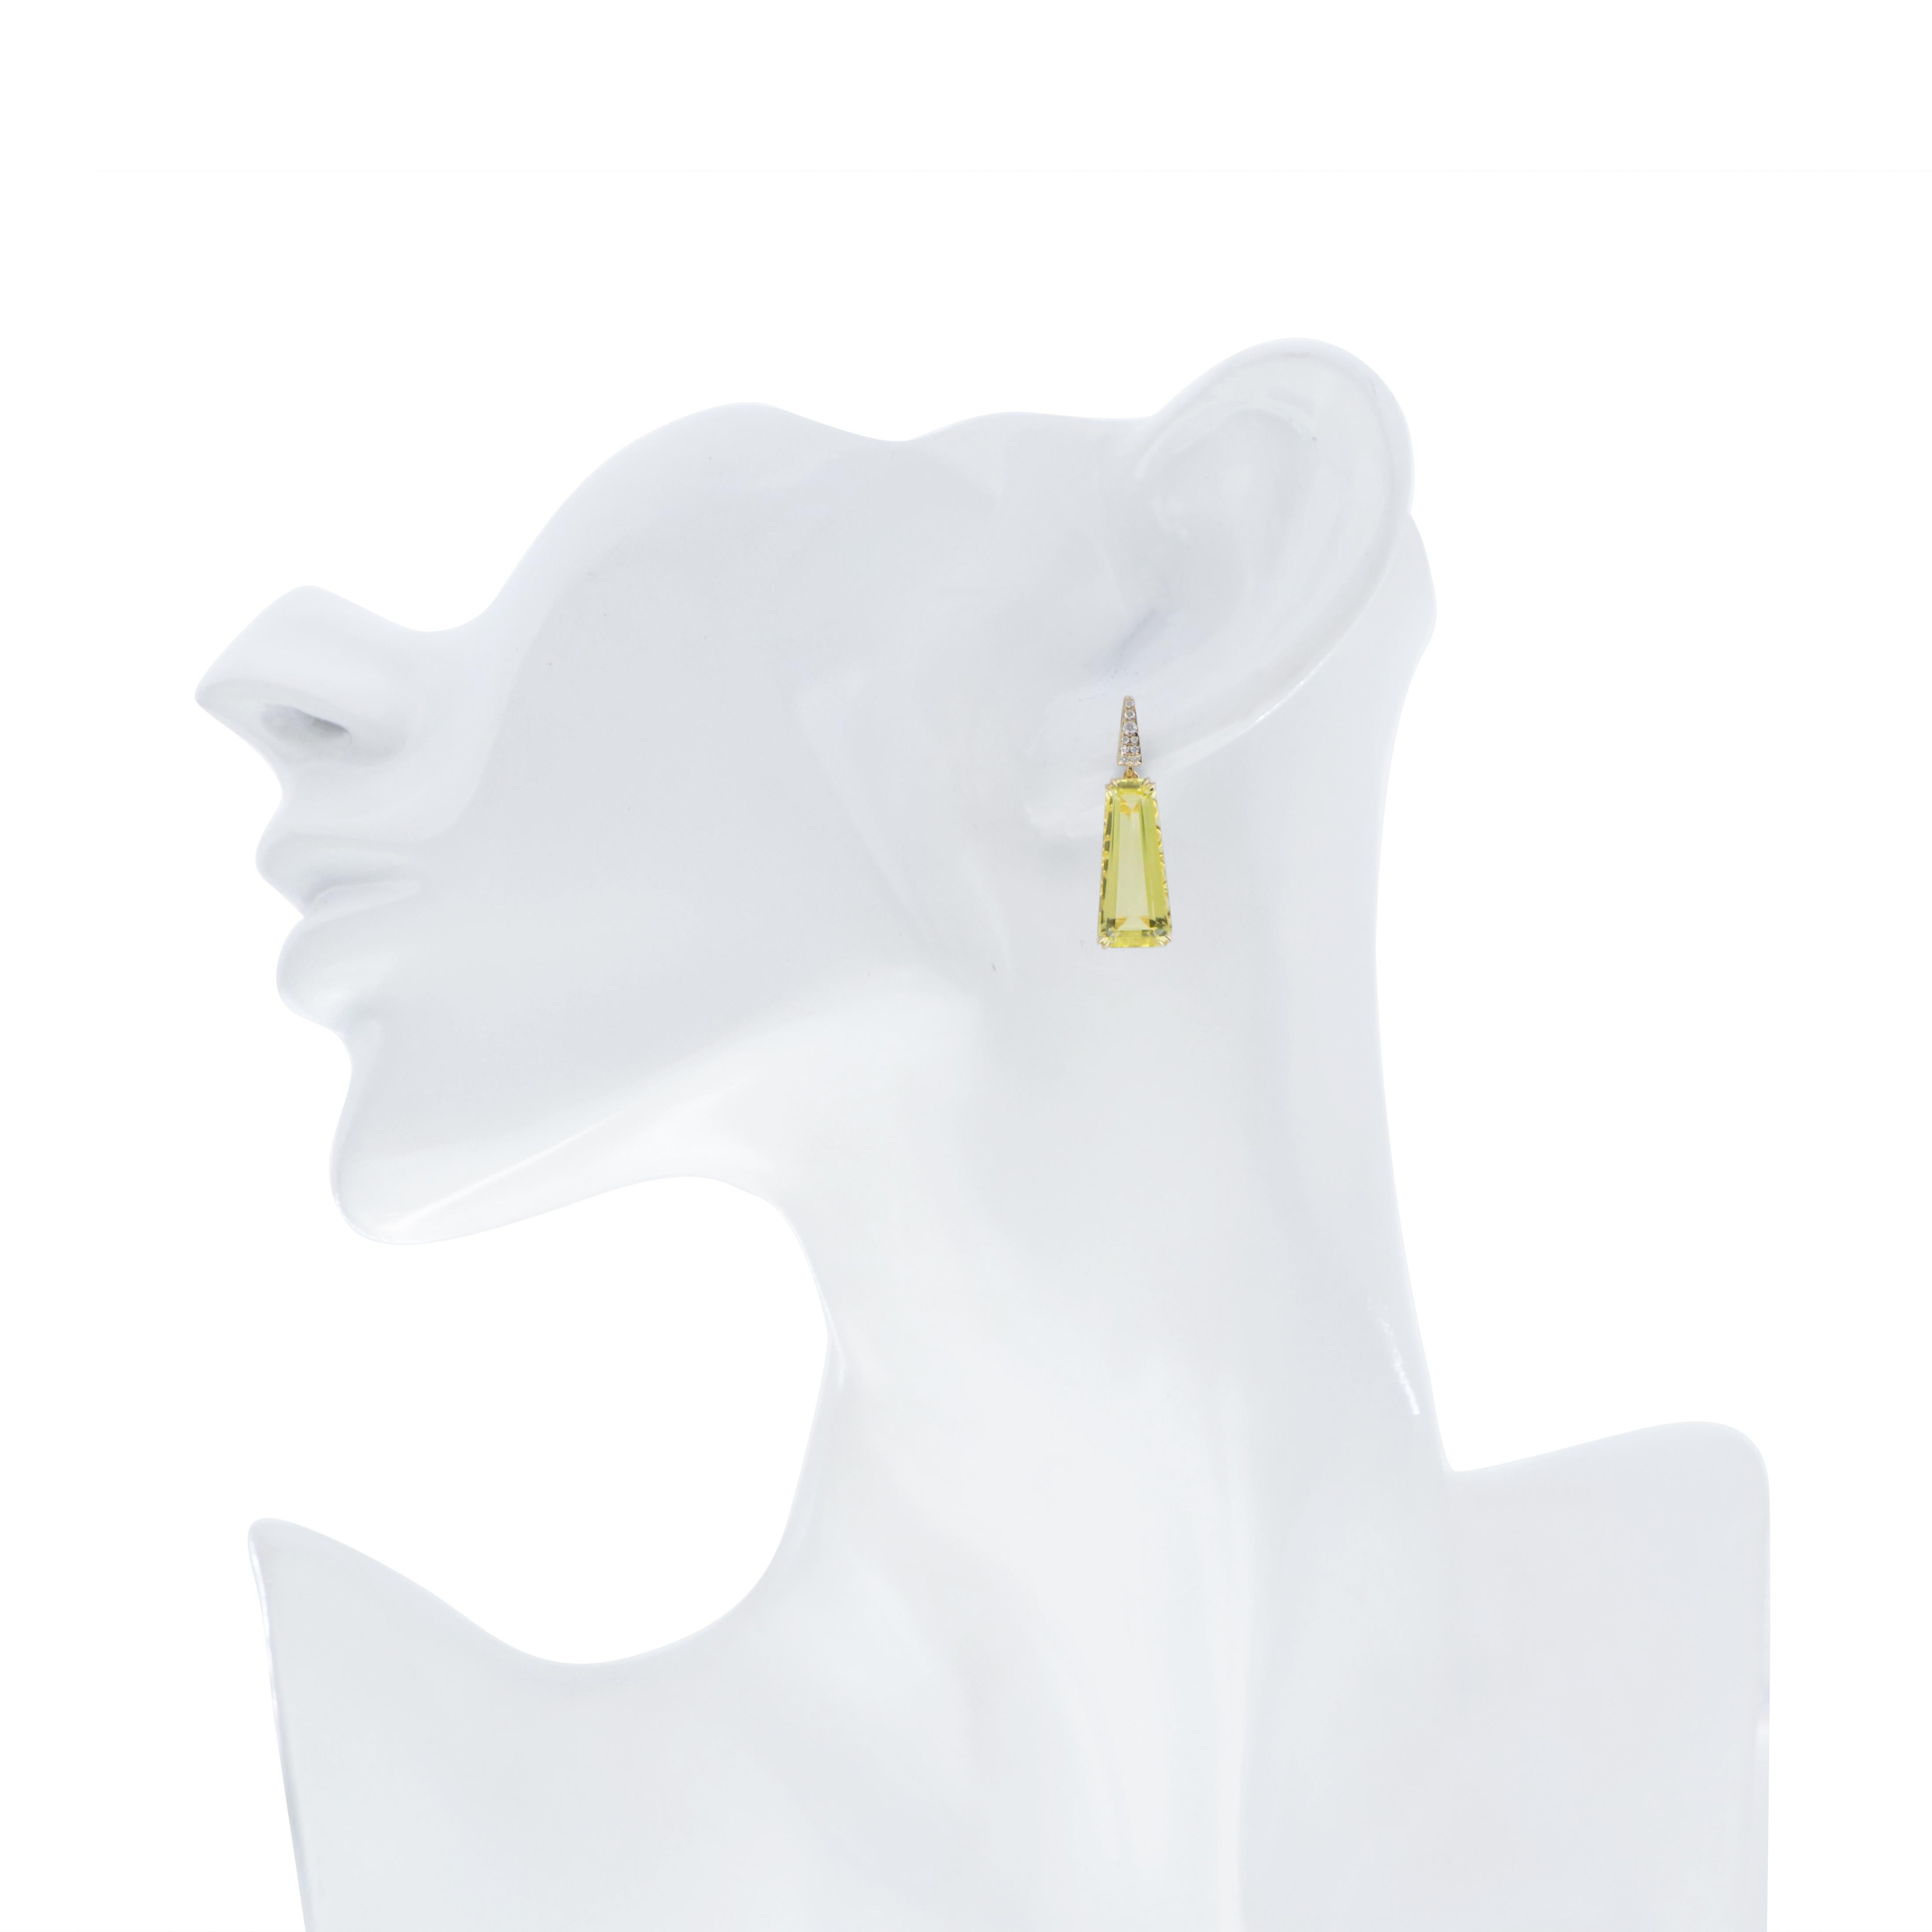 Exquisite 10.0 cts Lemon Quartz & Diamond Earrings, Handcrafted in 18K Gold For Sale 1